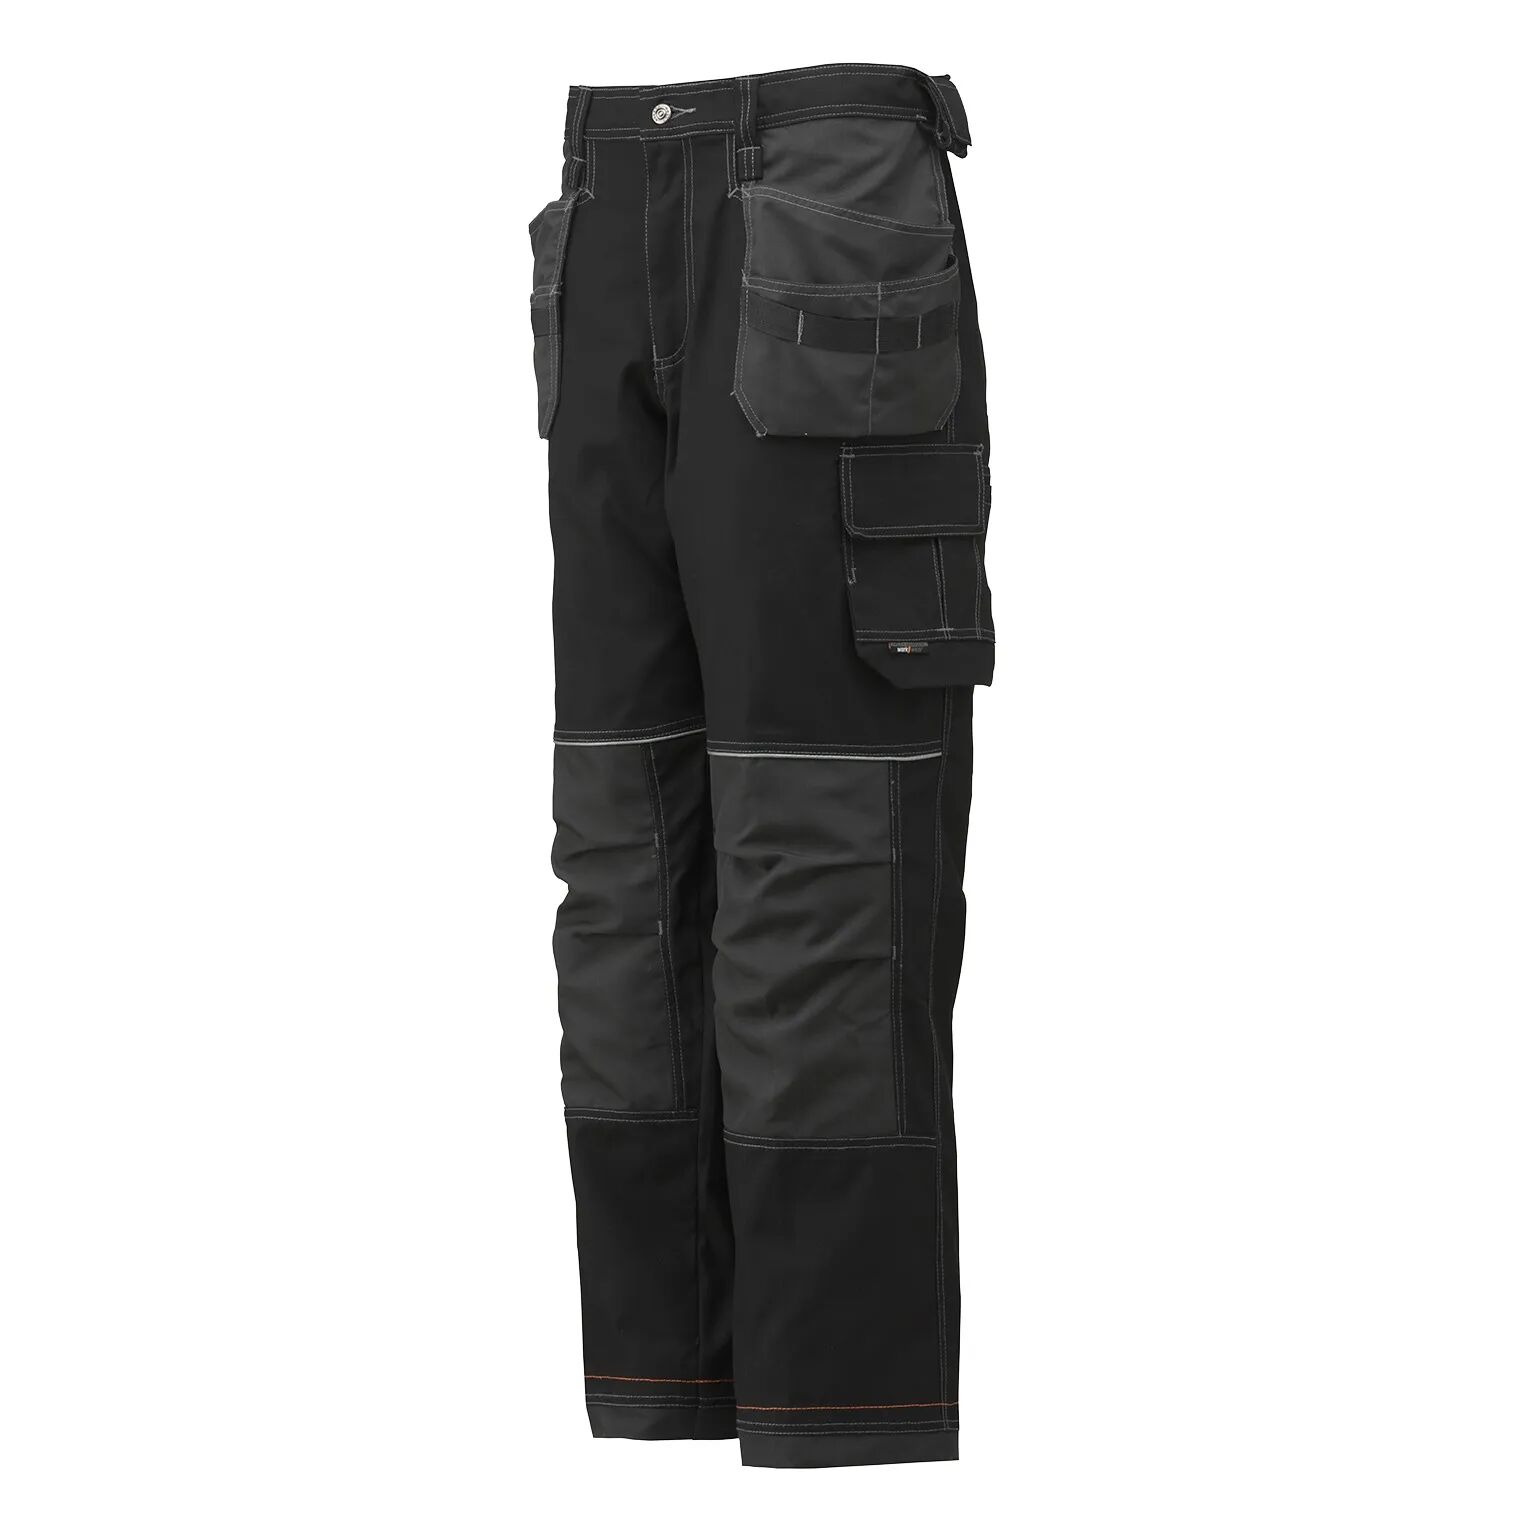 HH Workwear Helly Hansen WorkwearChelsea Lined Cons. Pant Black 40/32